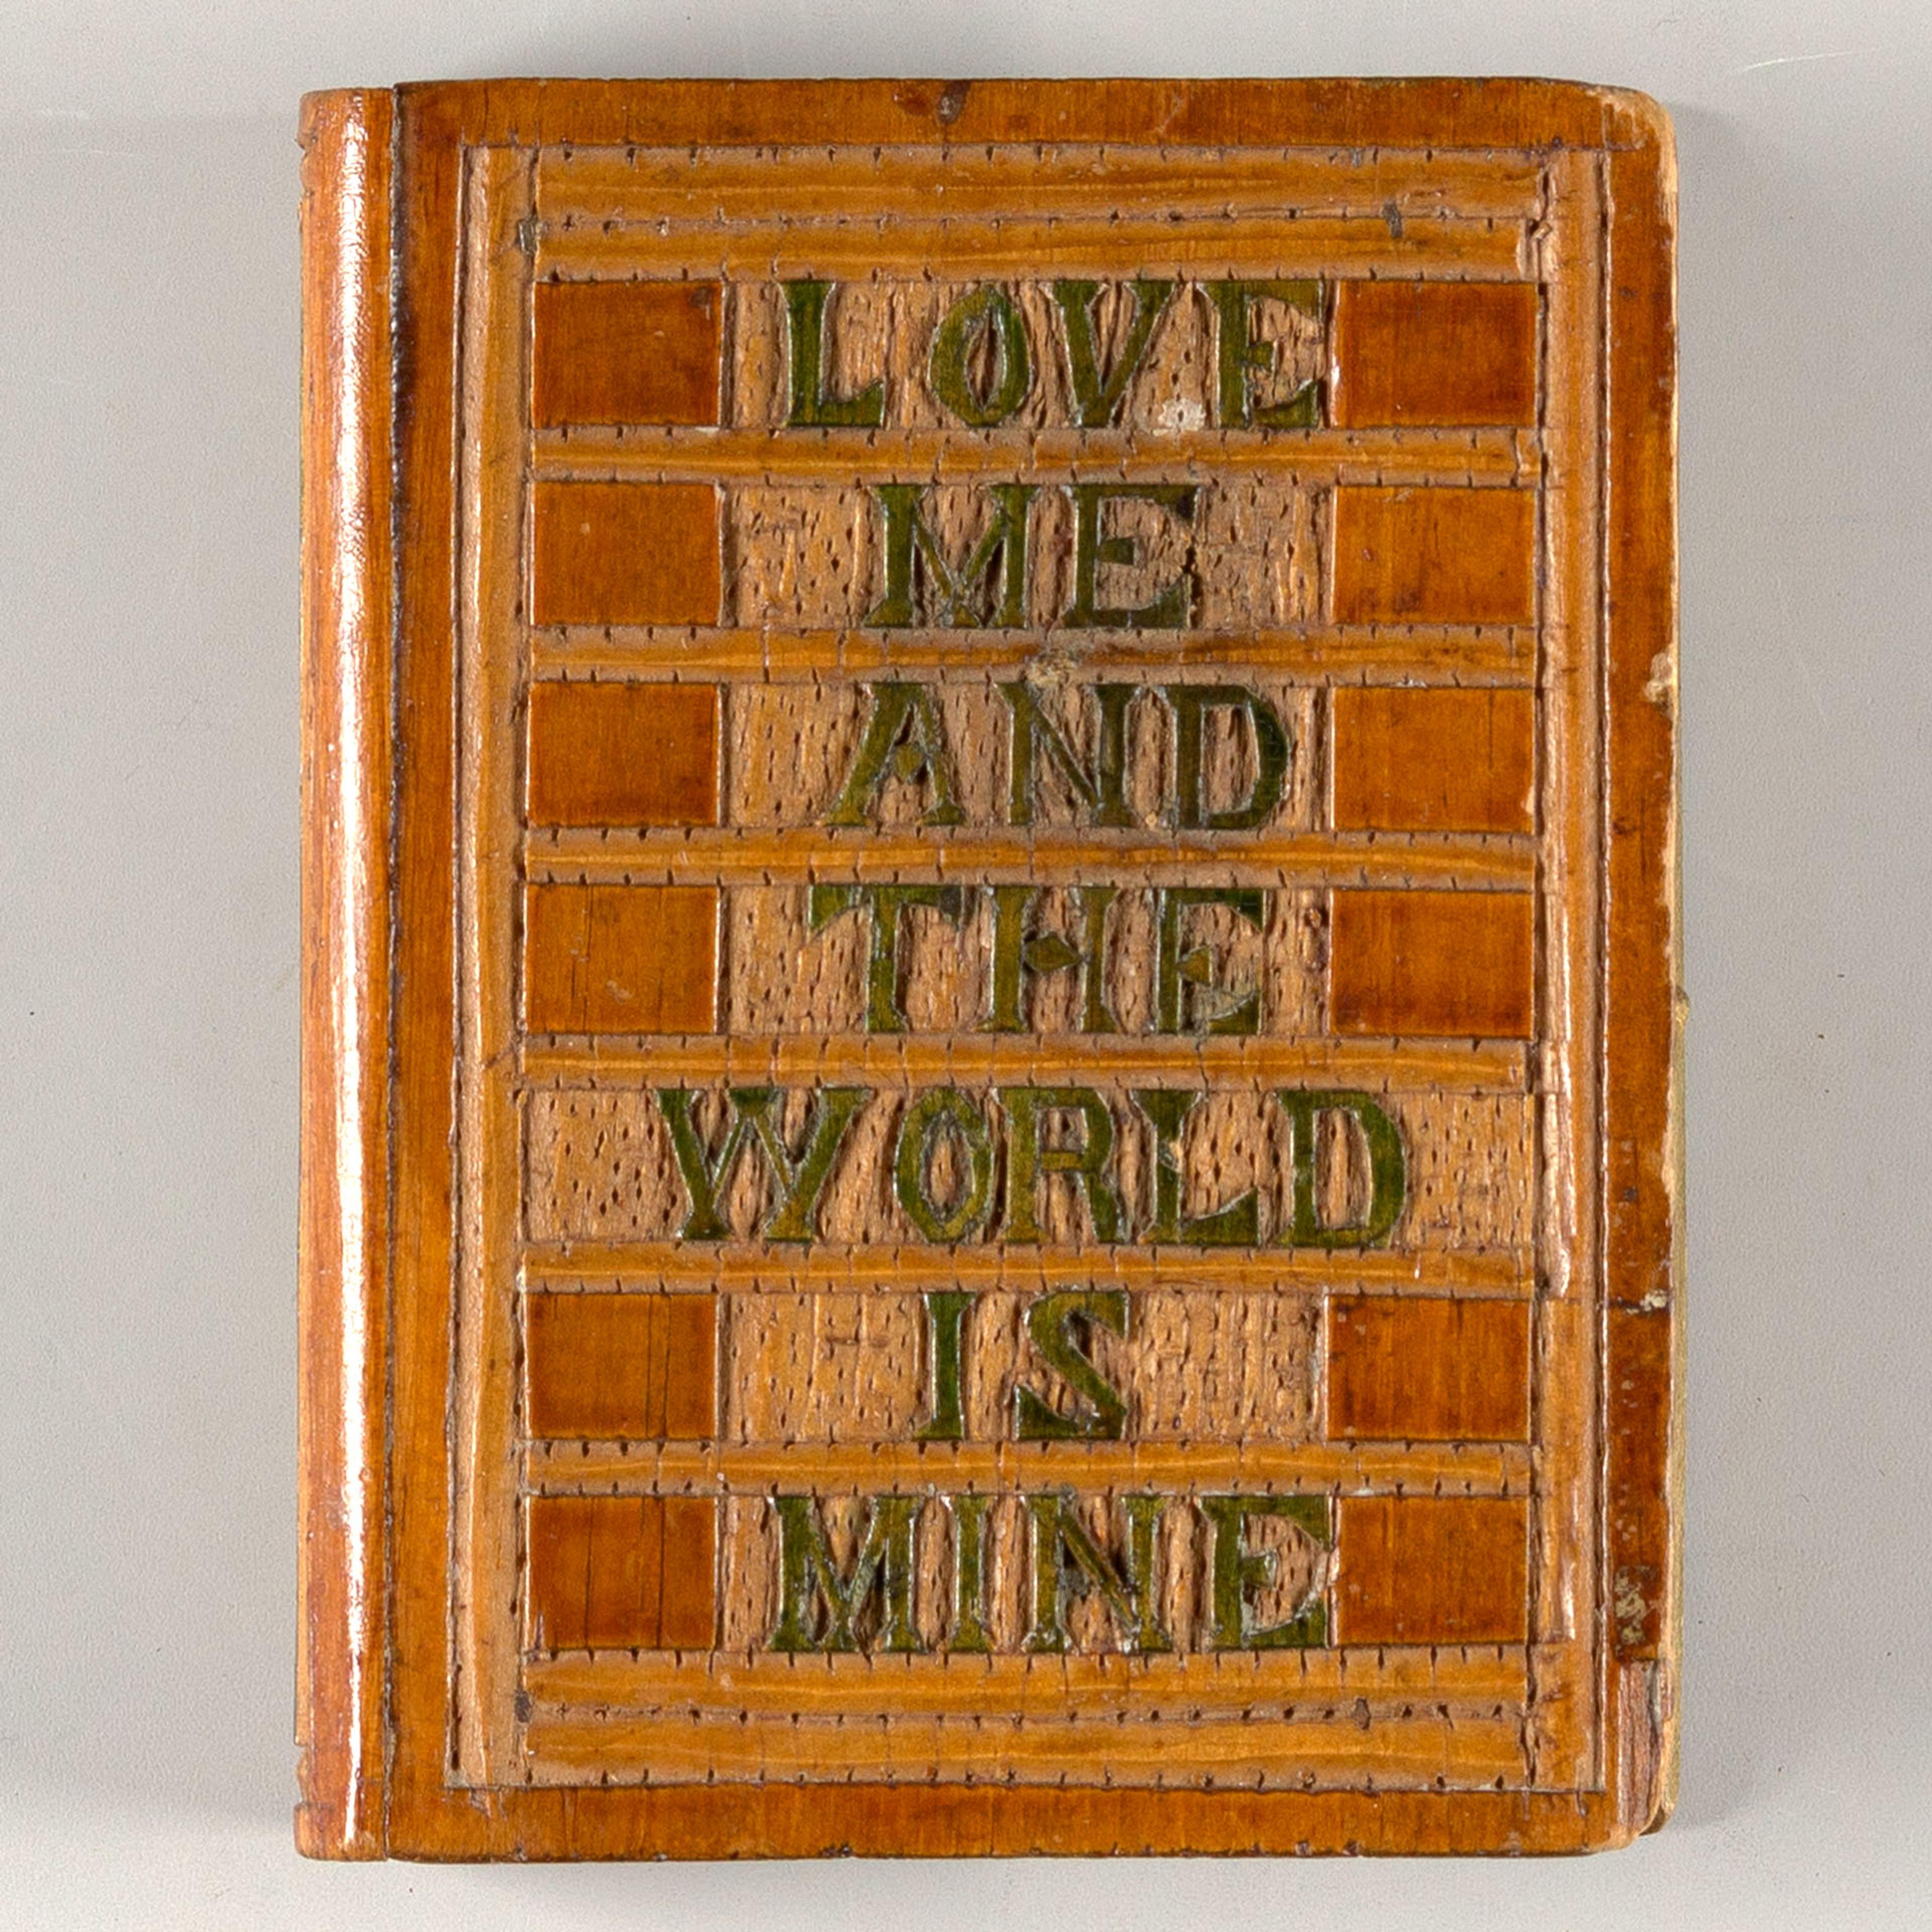 An antique wooden book cover, intricately crafted with a raised lettering message "love me and the world is mine," evoking a sense of vintage charm and romantic ideals.